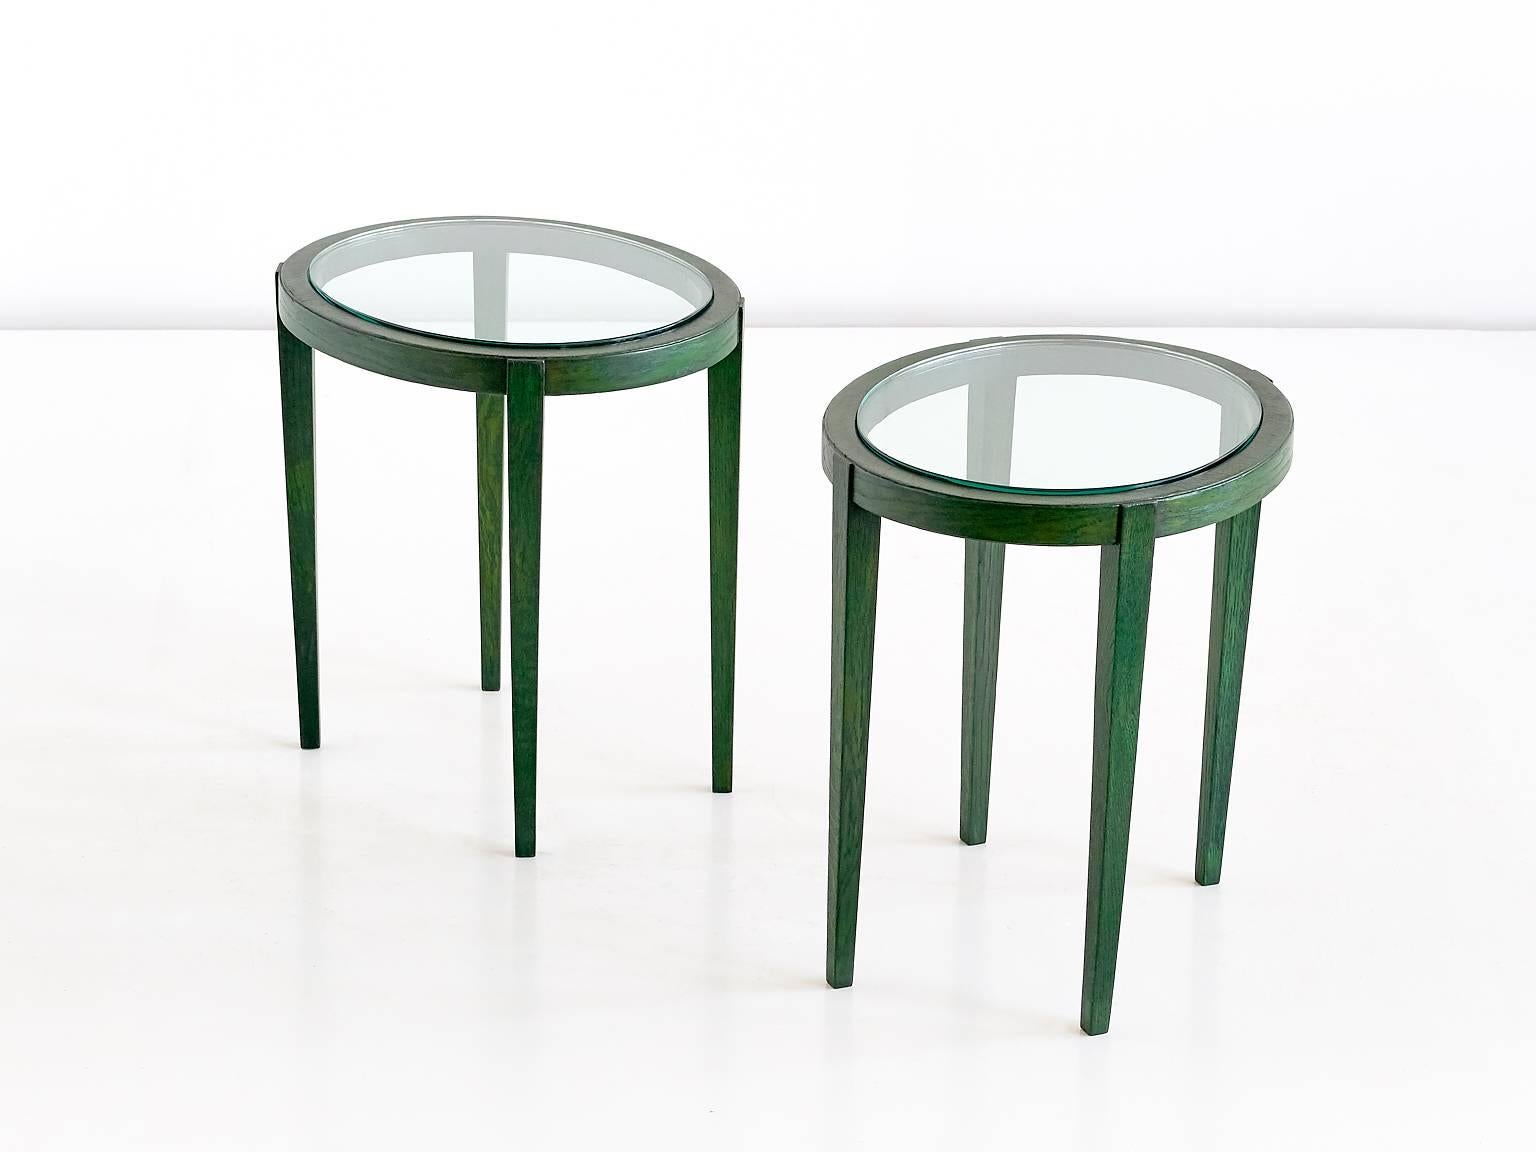 Mid-20th Century Pair of Green Italian Art Deco Side Tables Designed for a Florentine Residence